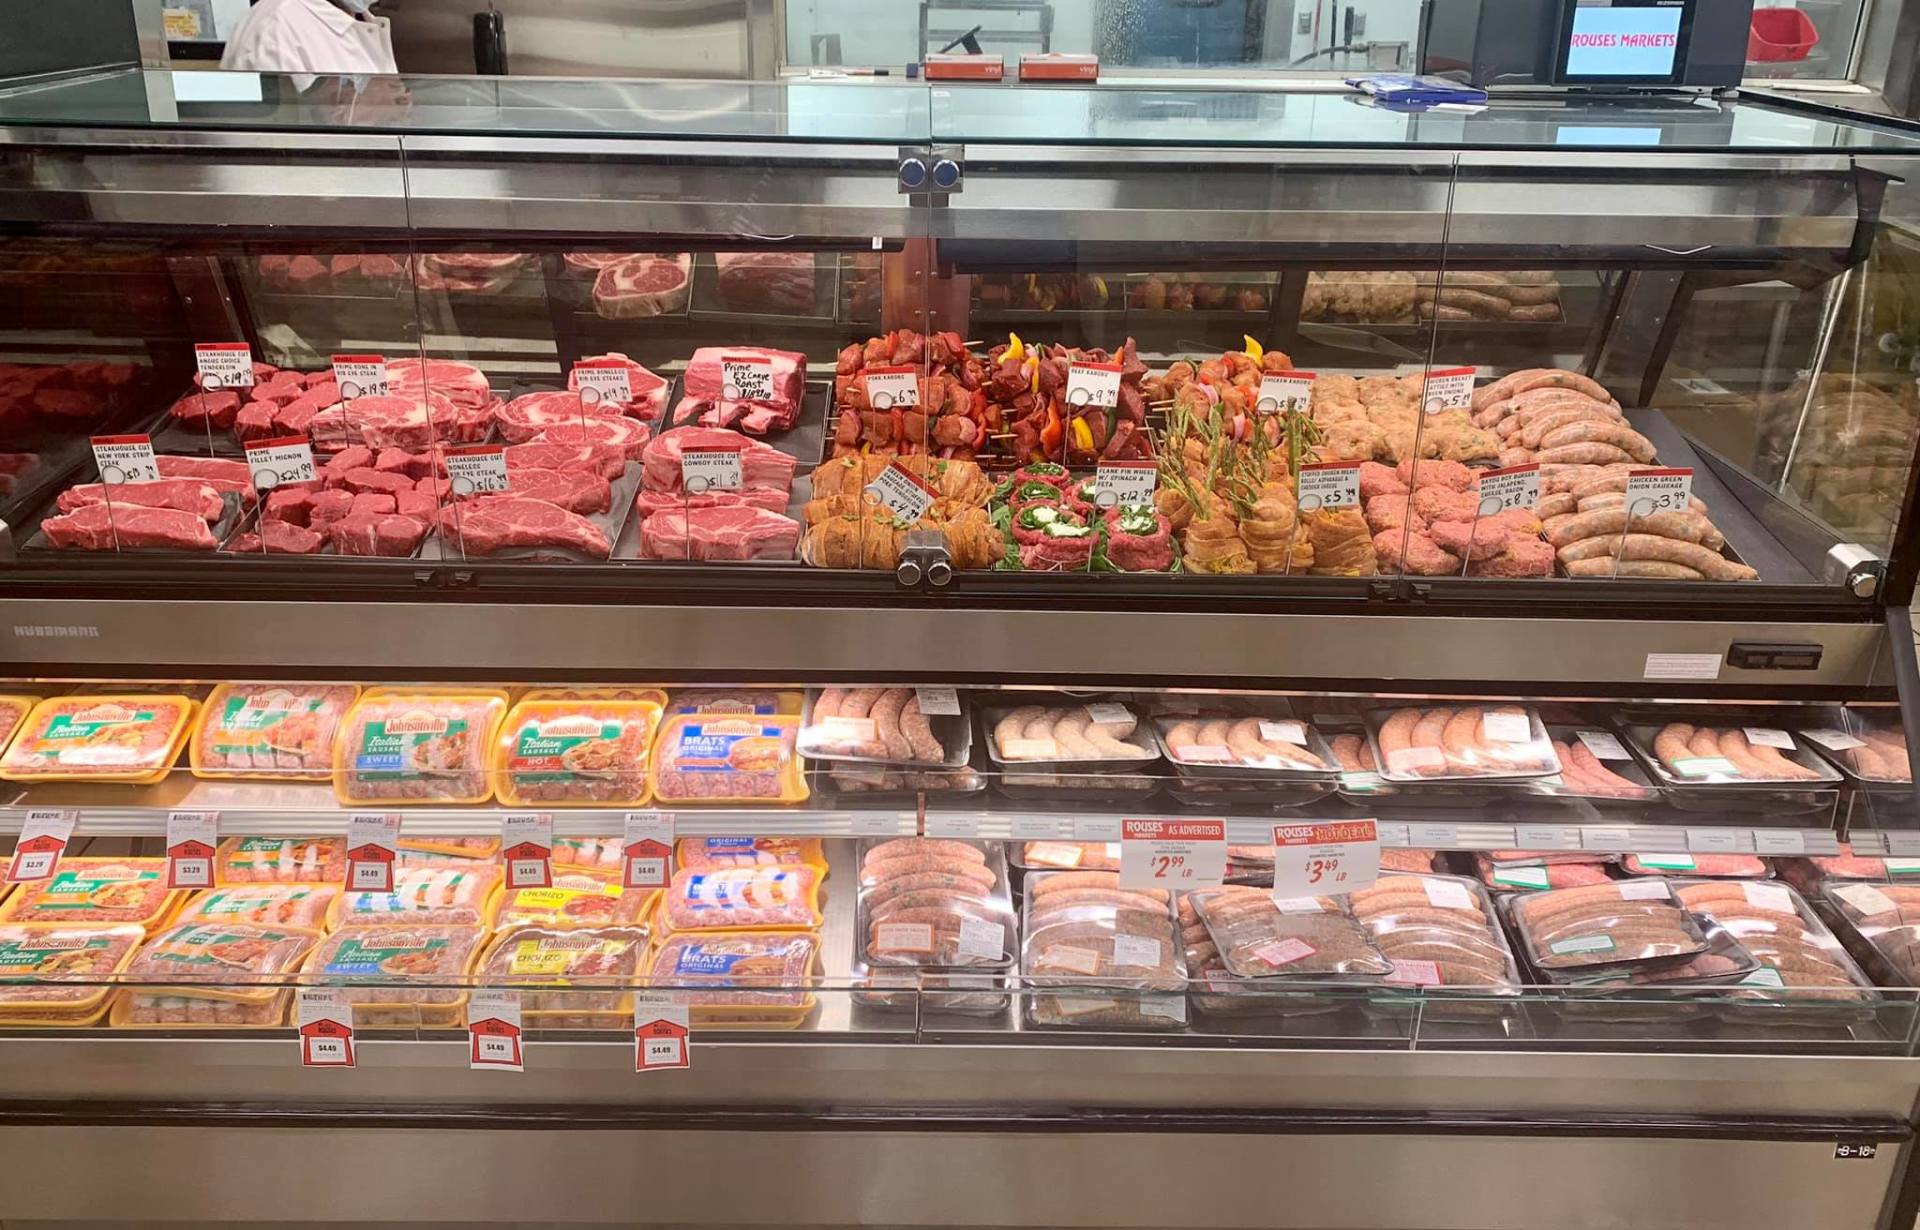 Meat case at Rouses Market in Orange Beach, Alabama.